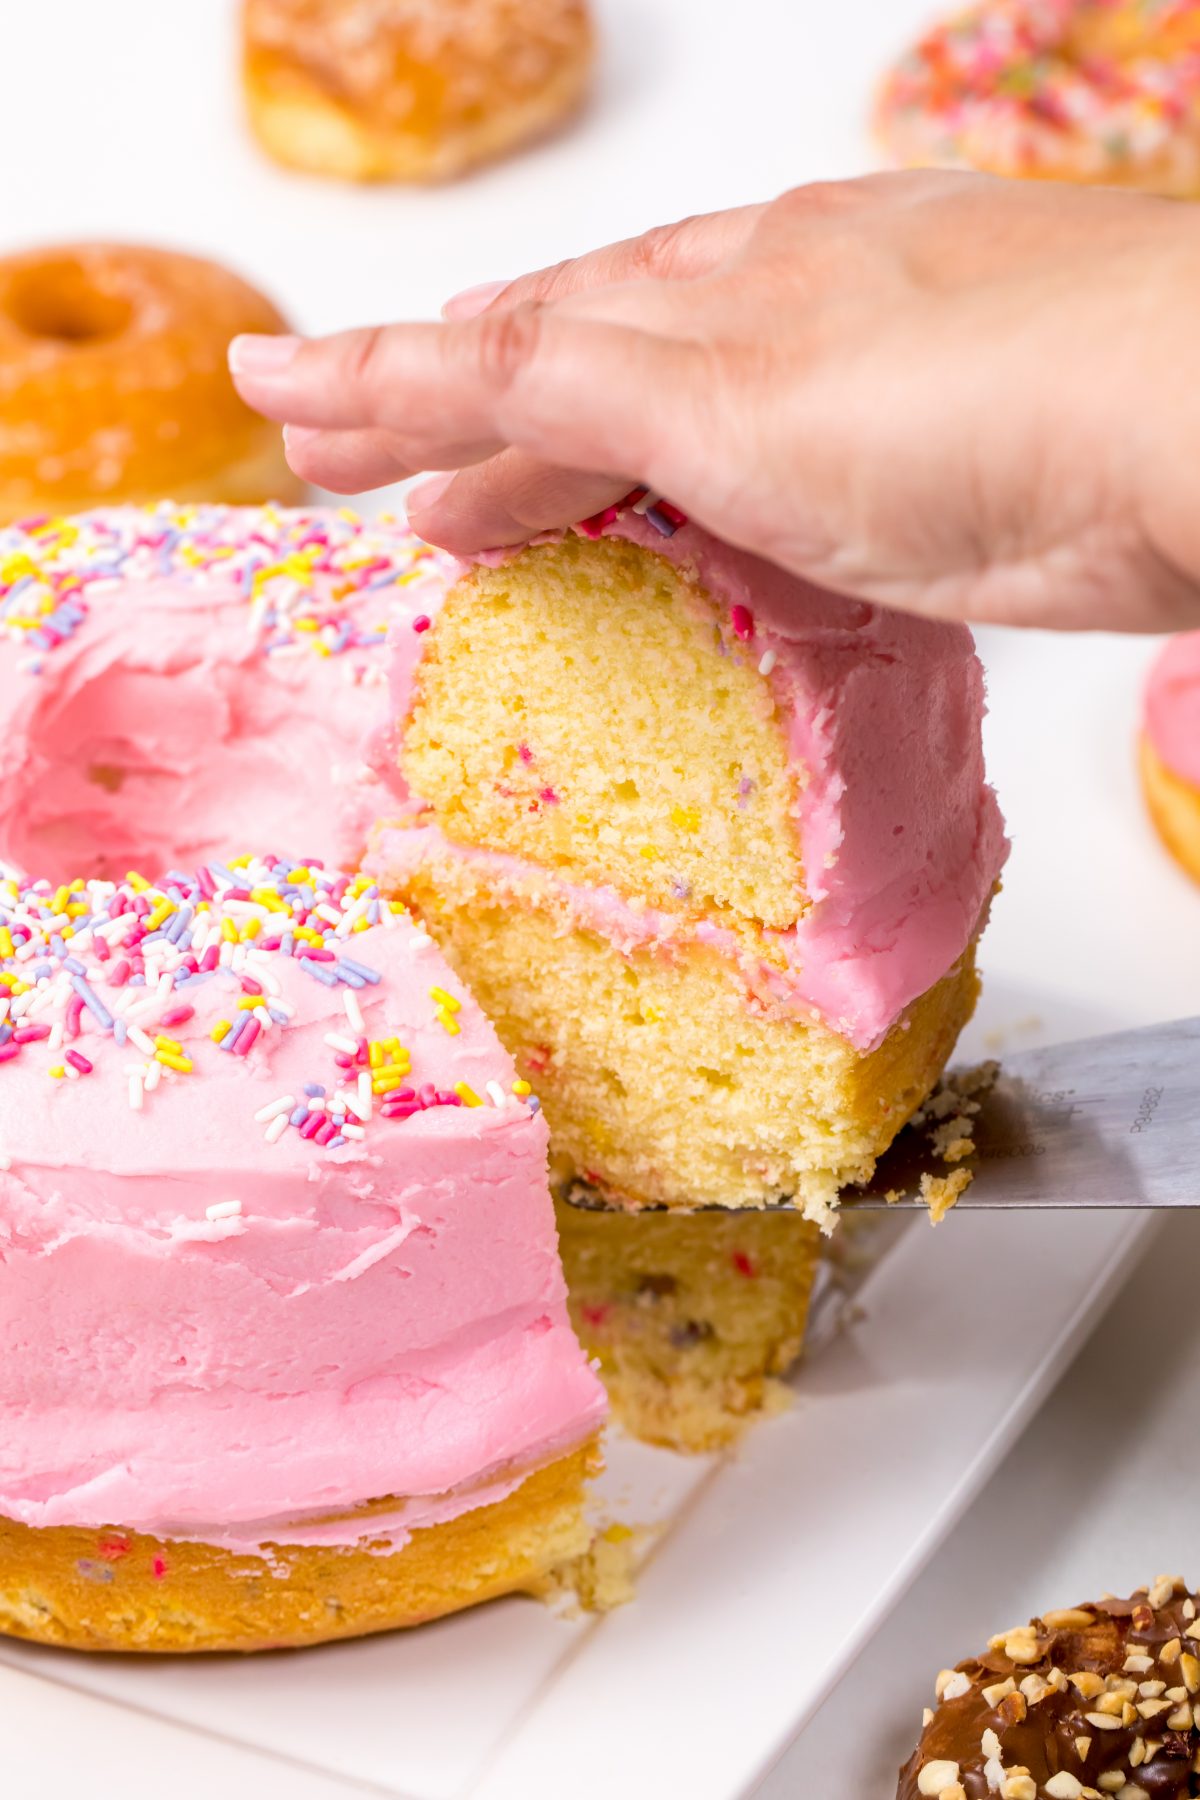 A slice of this cake is a donut lovers dream come true